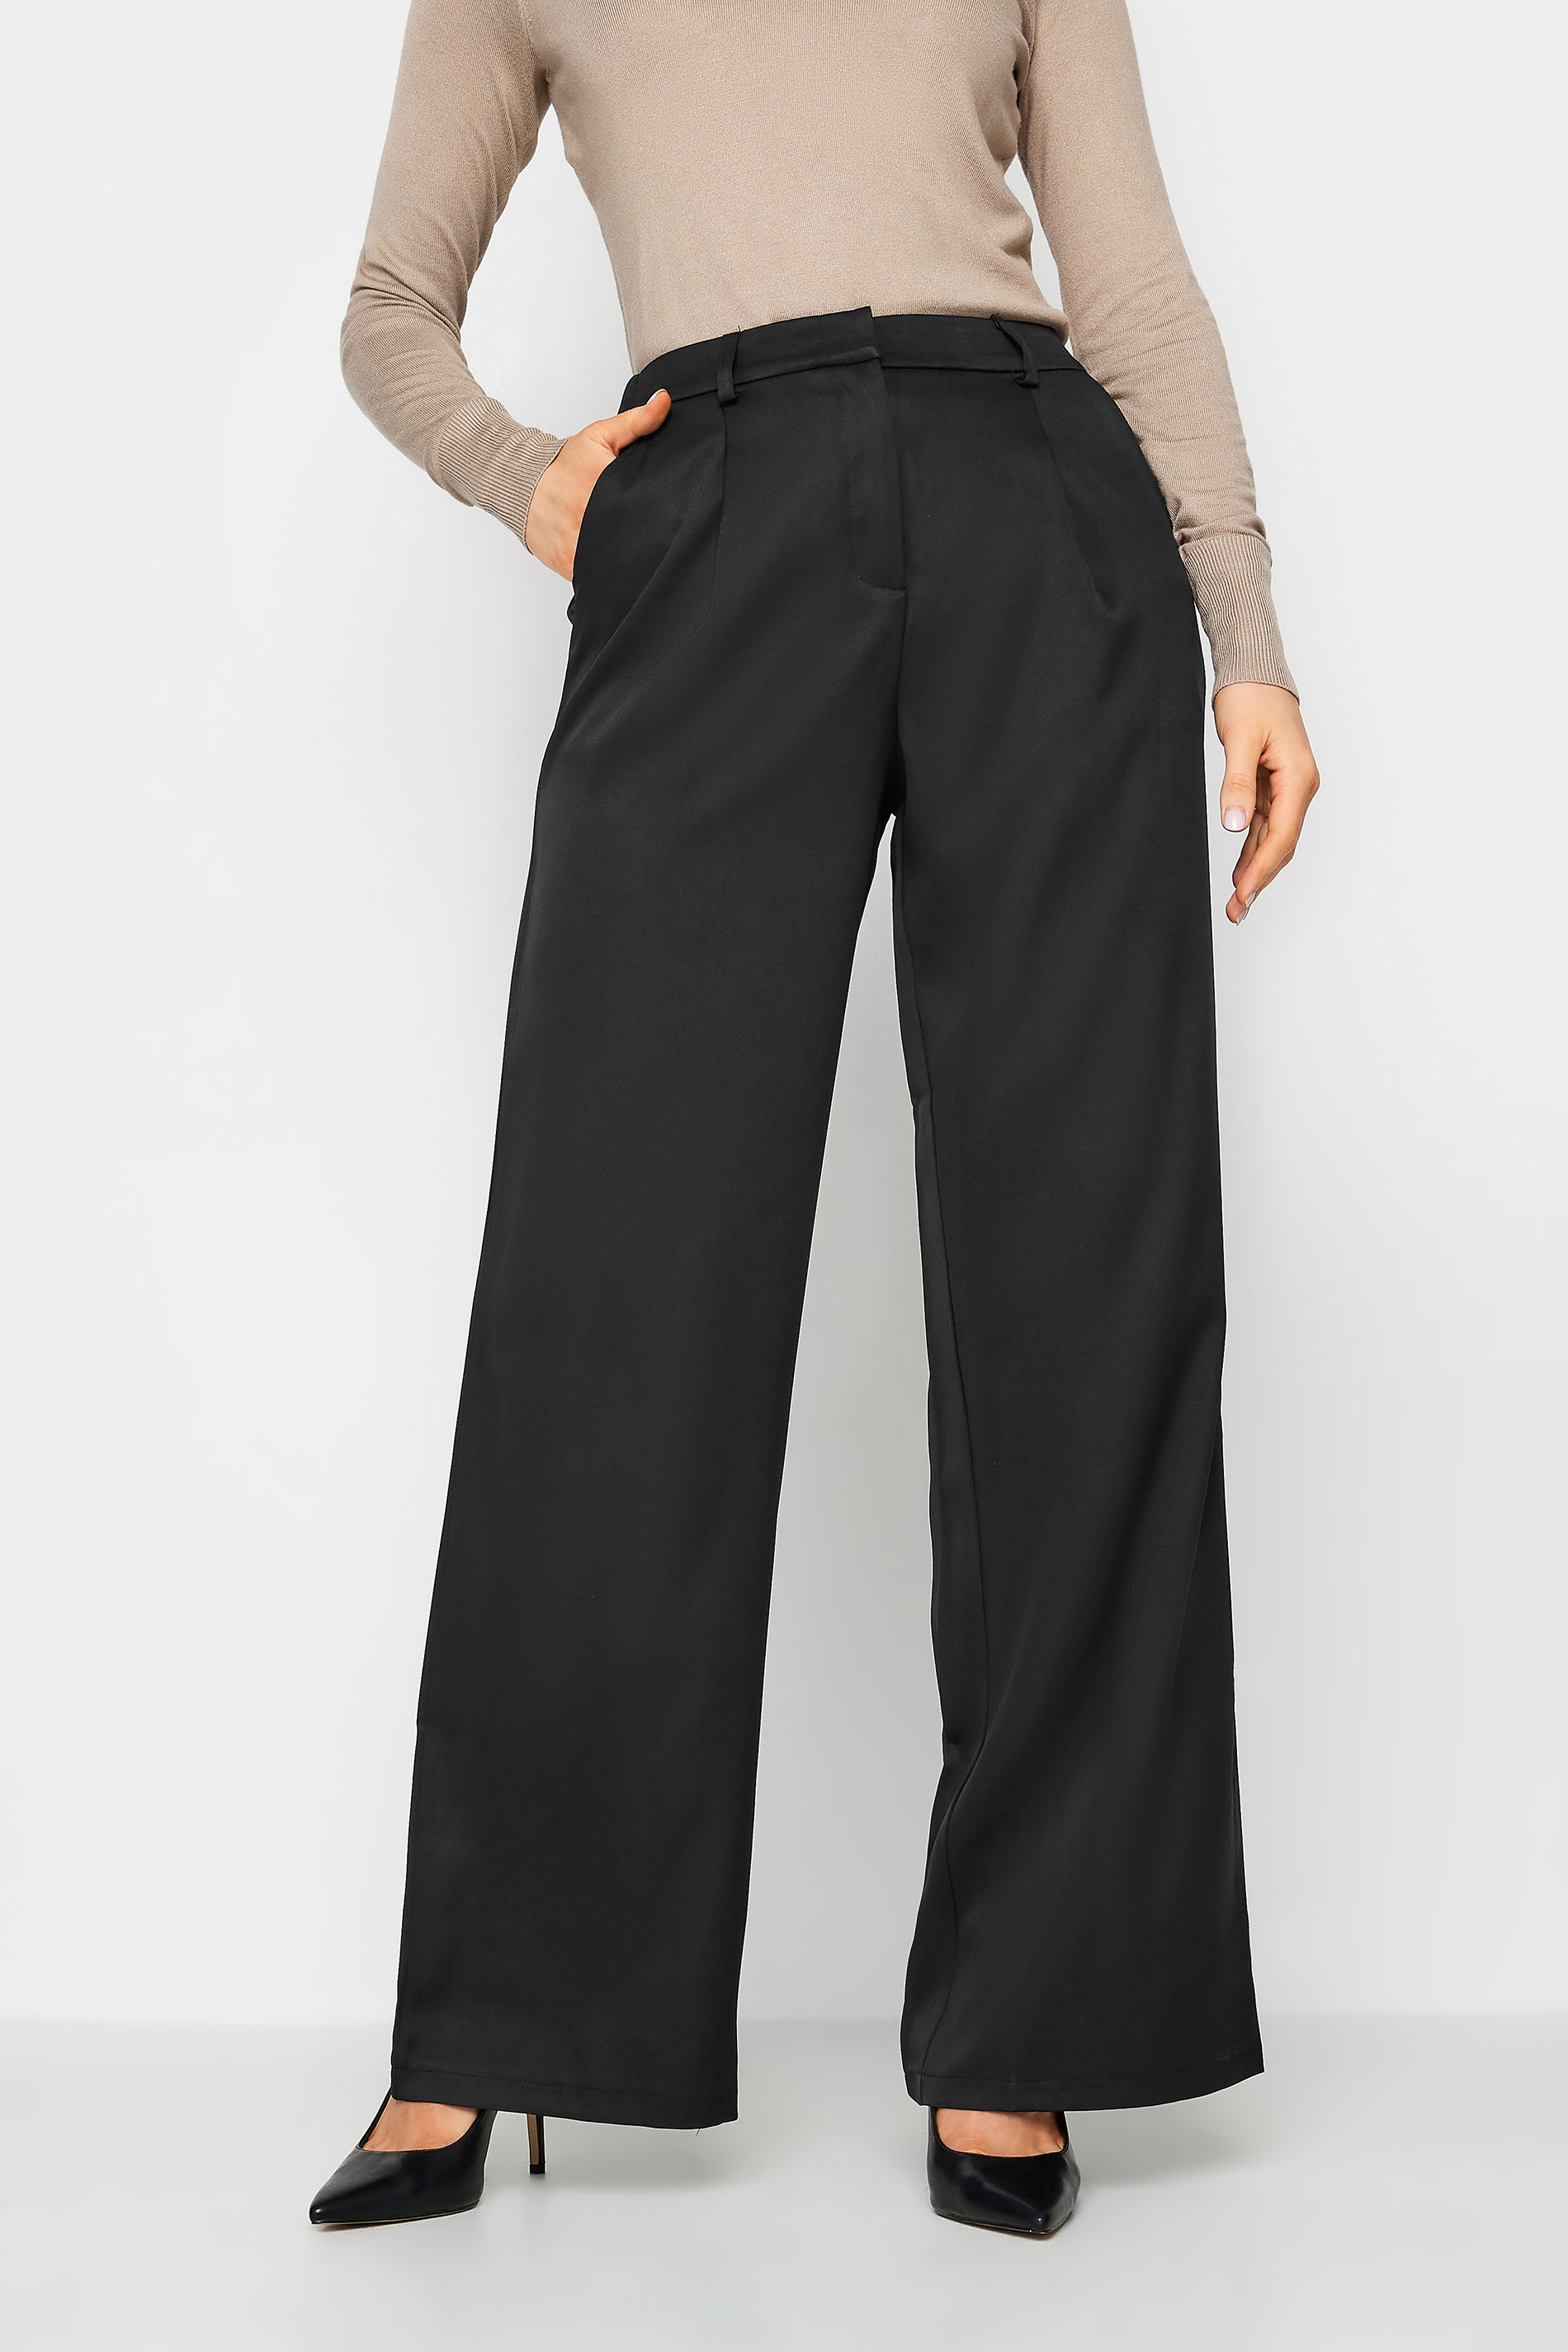 LTS Tall Womens Black Tailored Wide Leg Trousers | Long Tall Sally 3